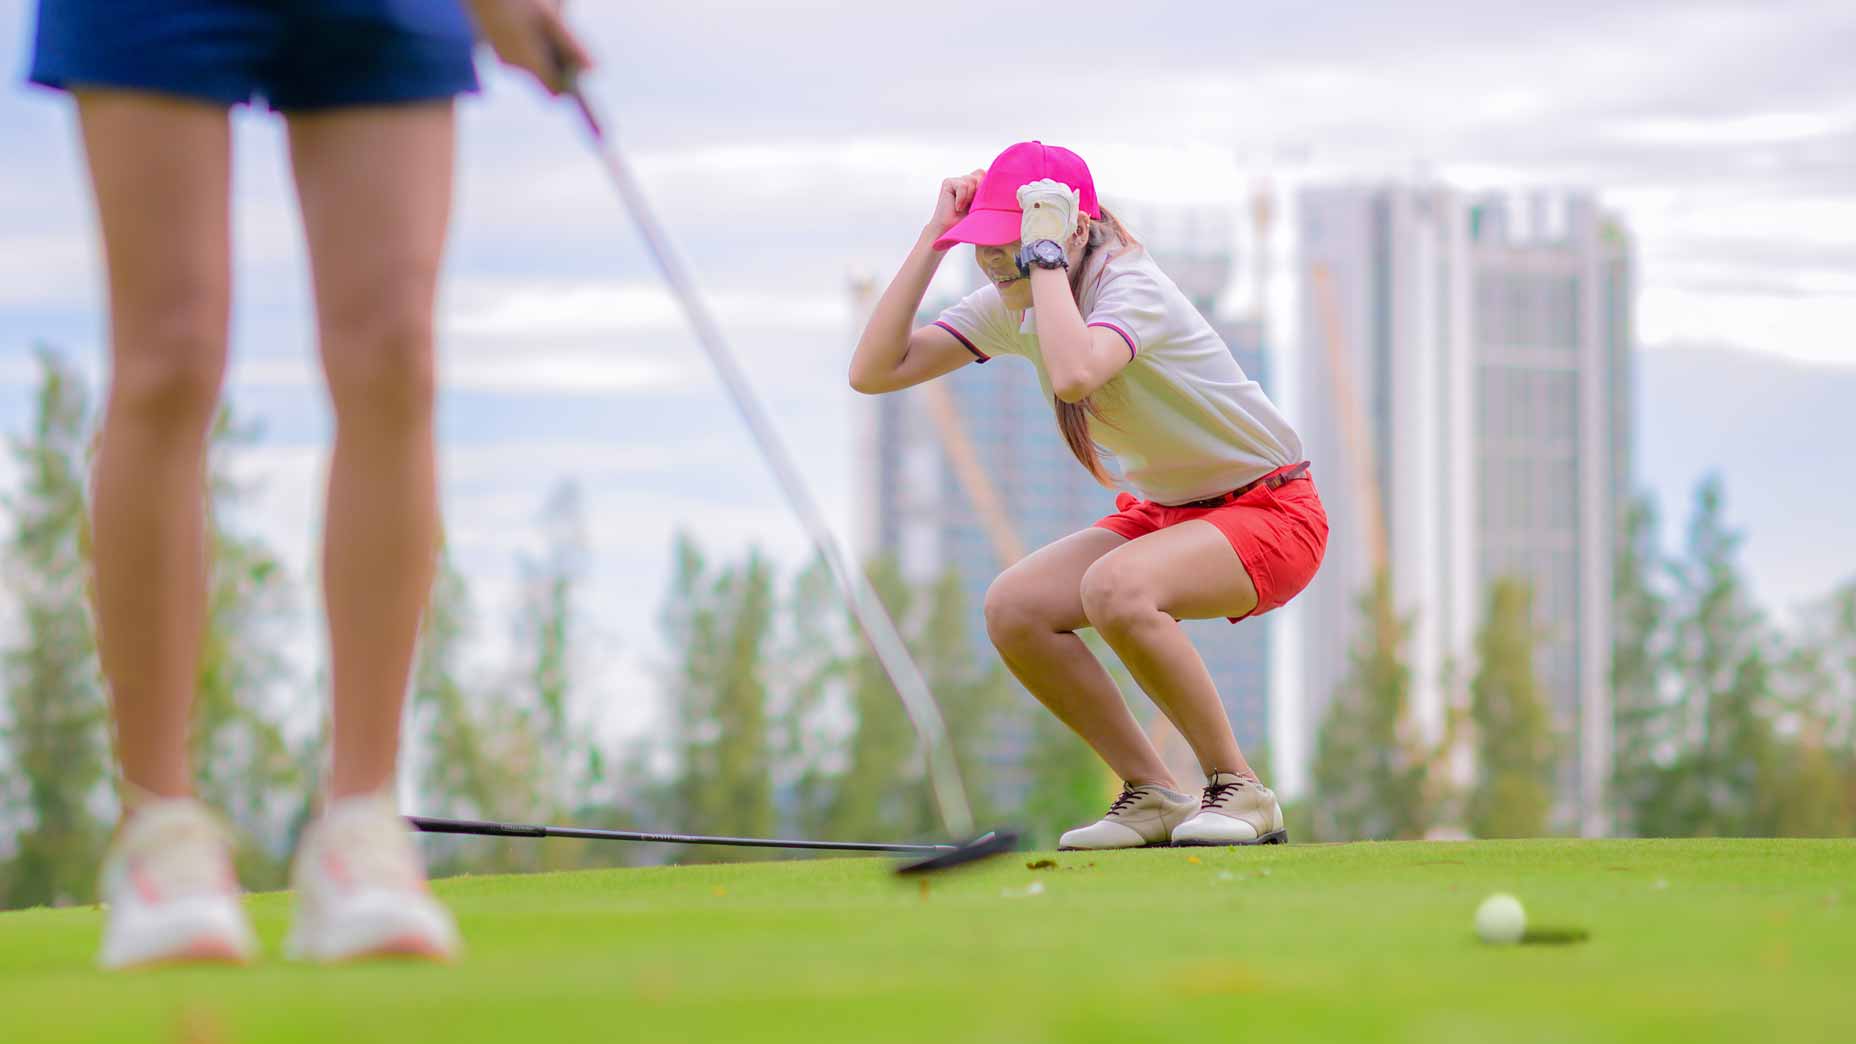 woman angry over putt